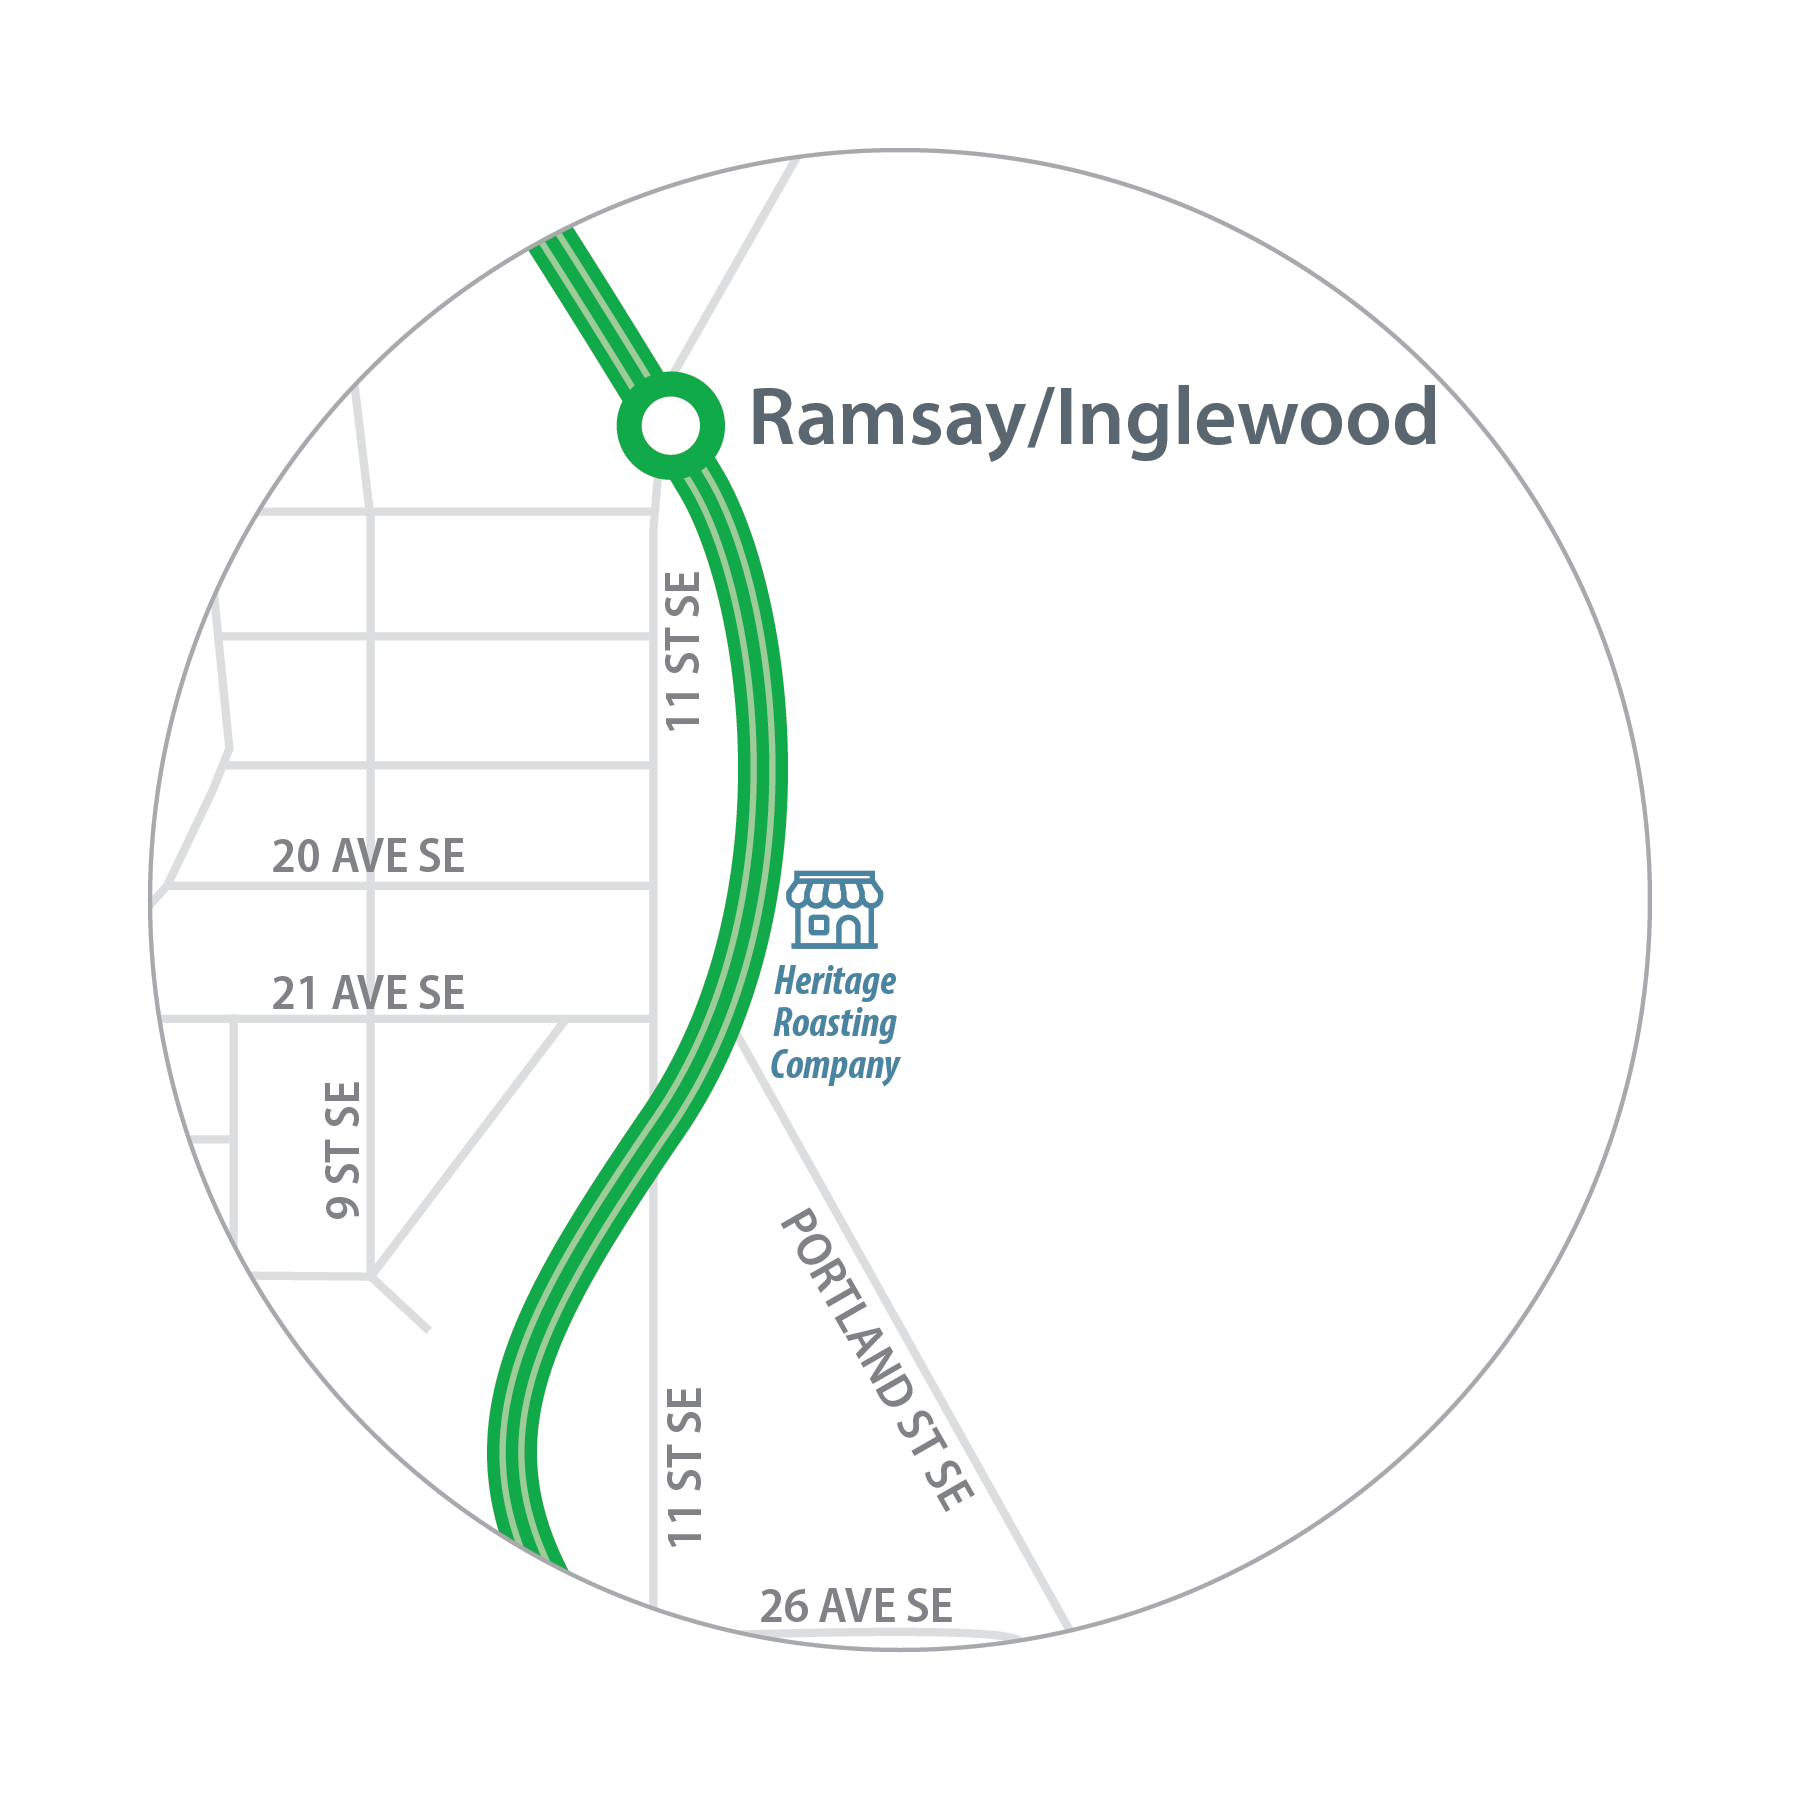 Map of Calgary Heritage Roasting Company location in relation to Ramsay/Inglewood Station.